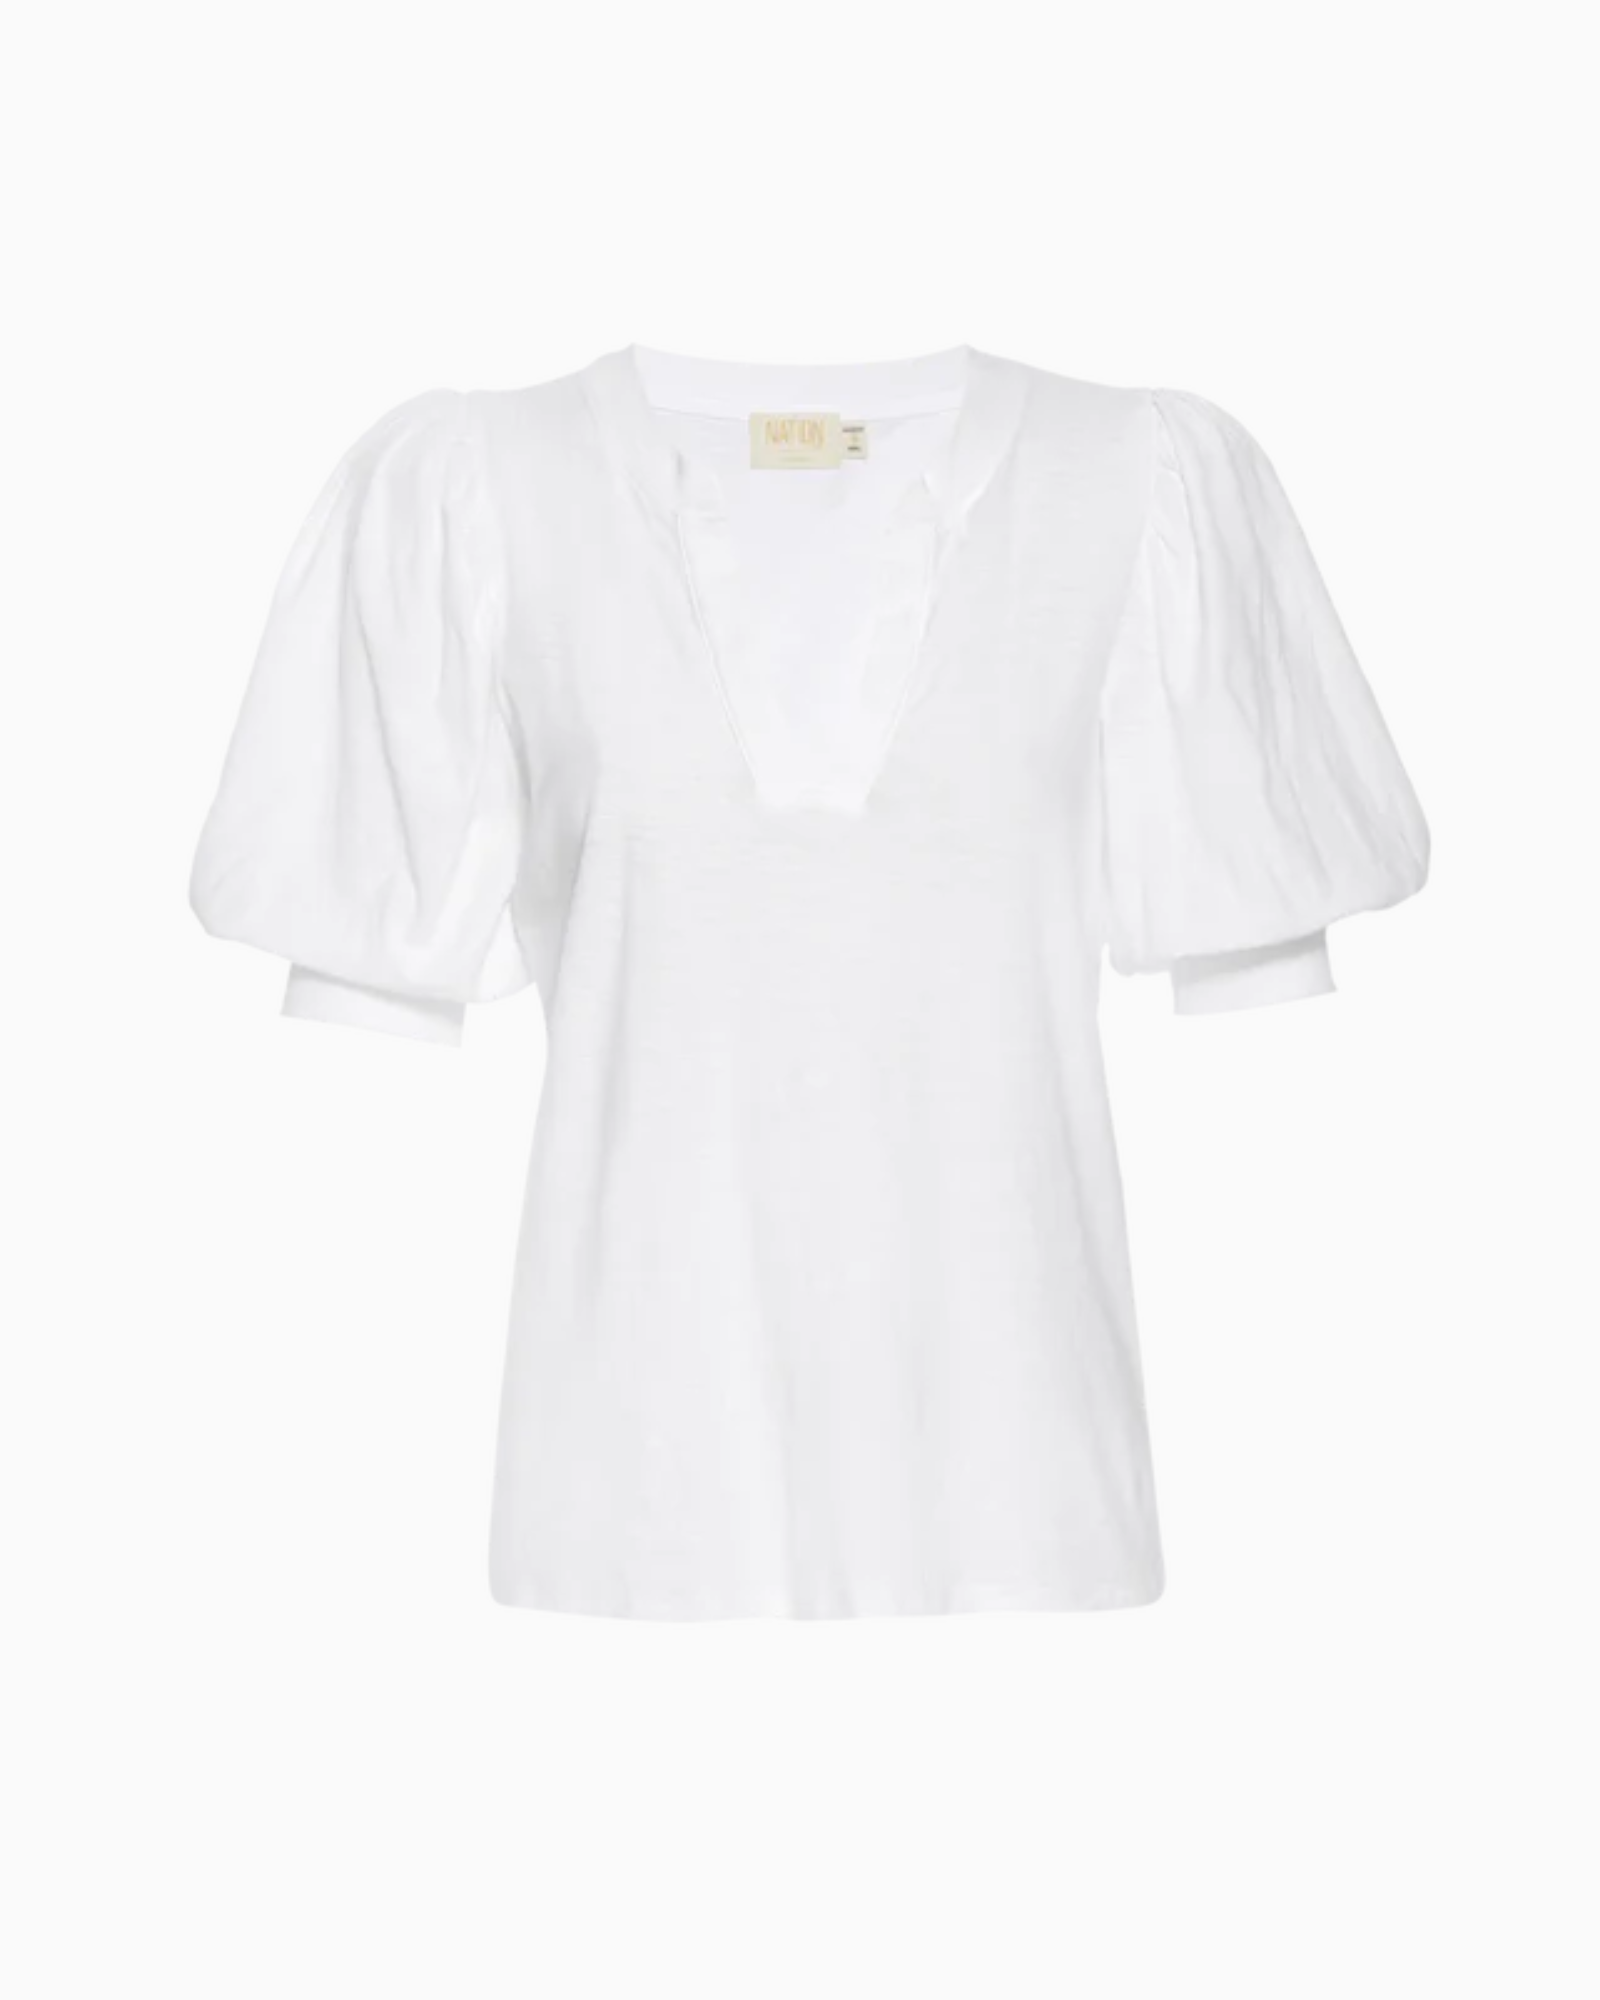 Nation Lou Peasant Top in White